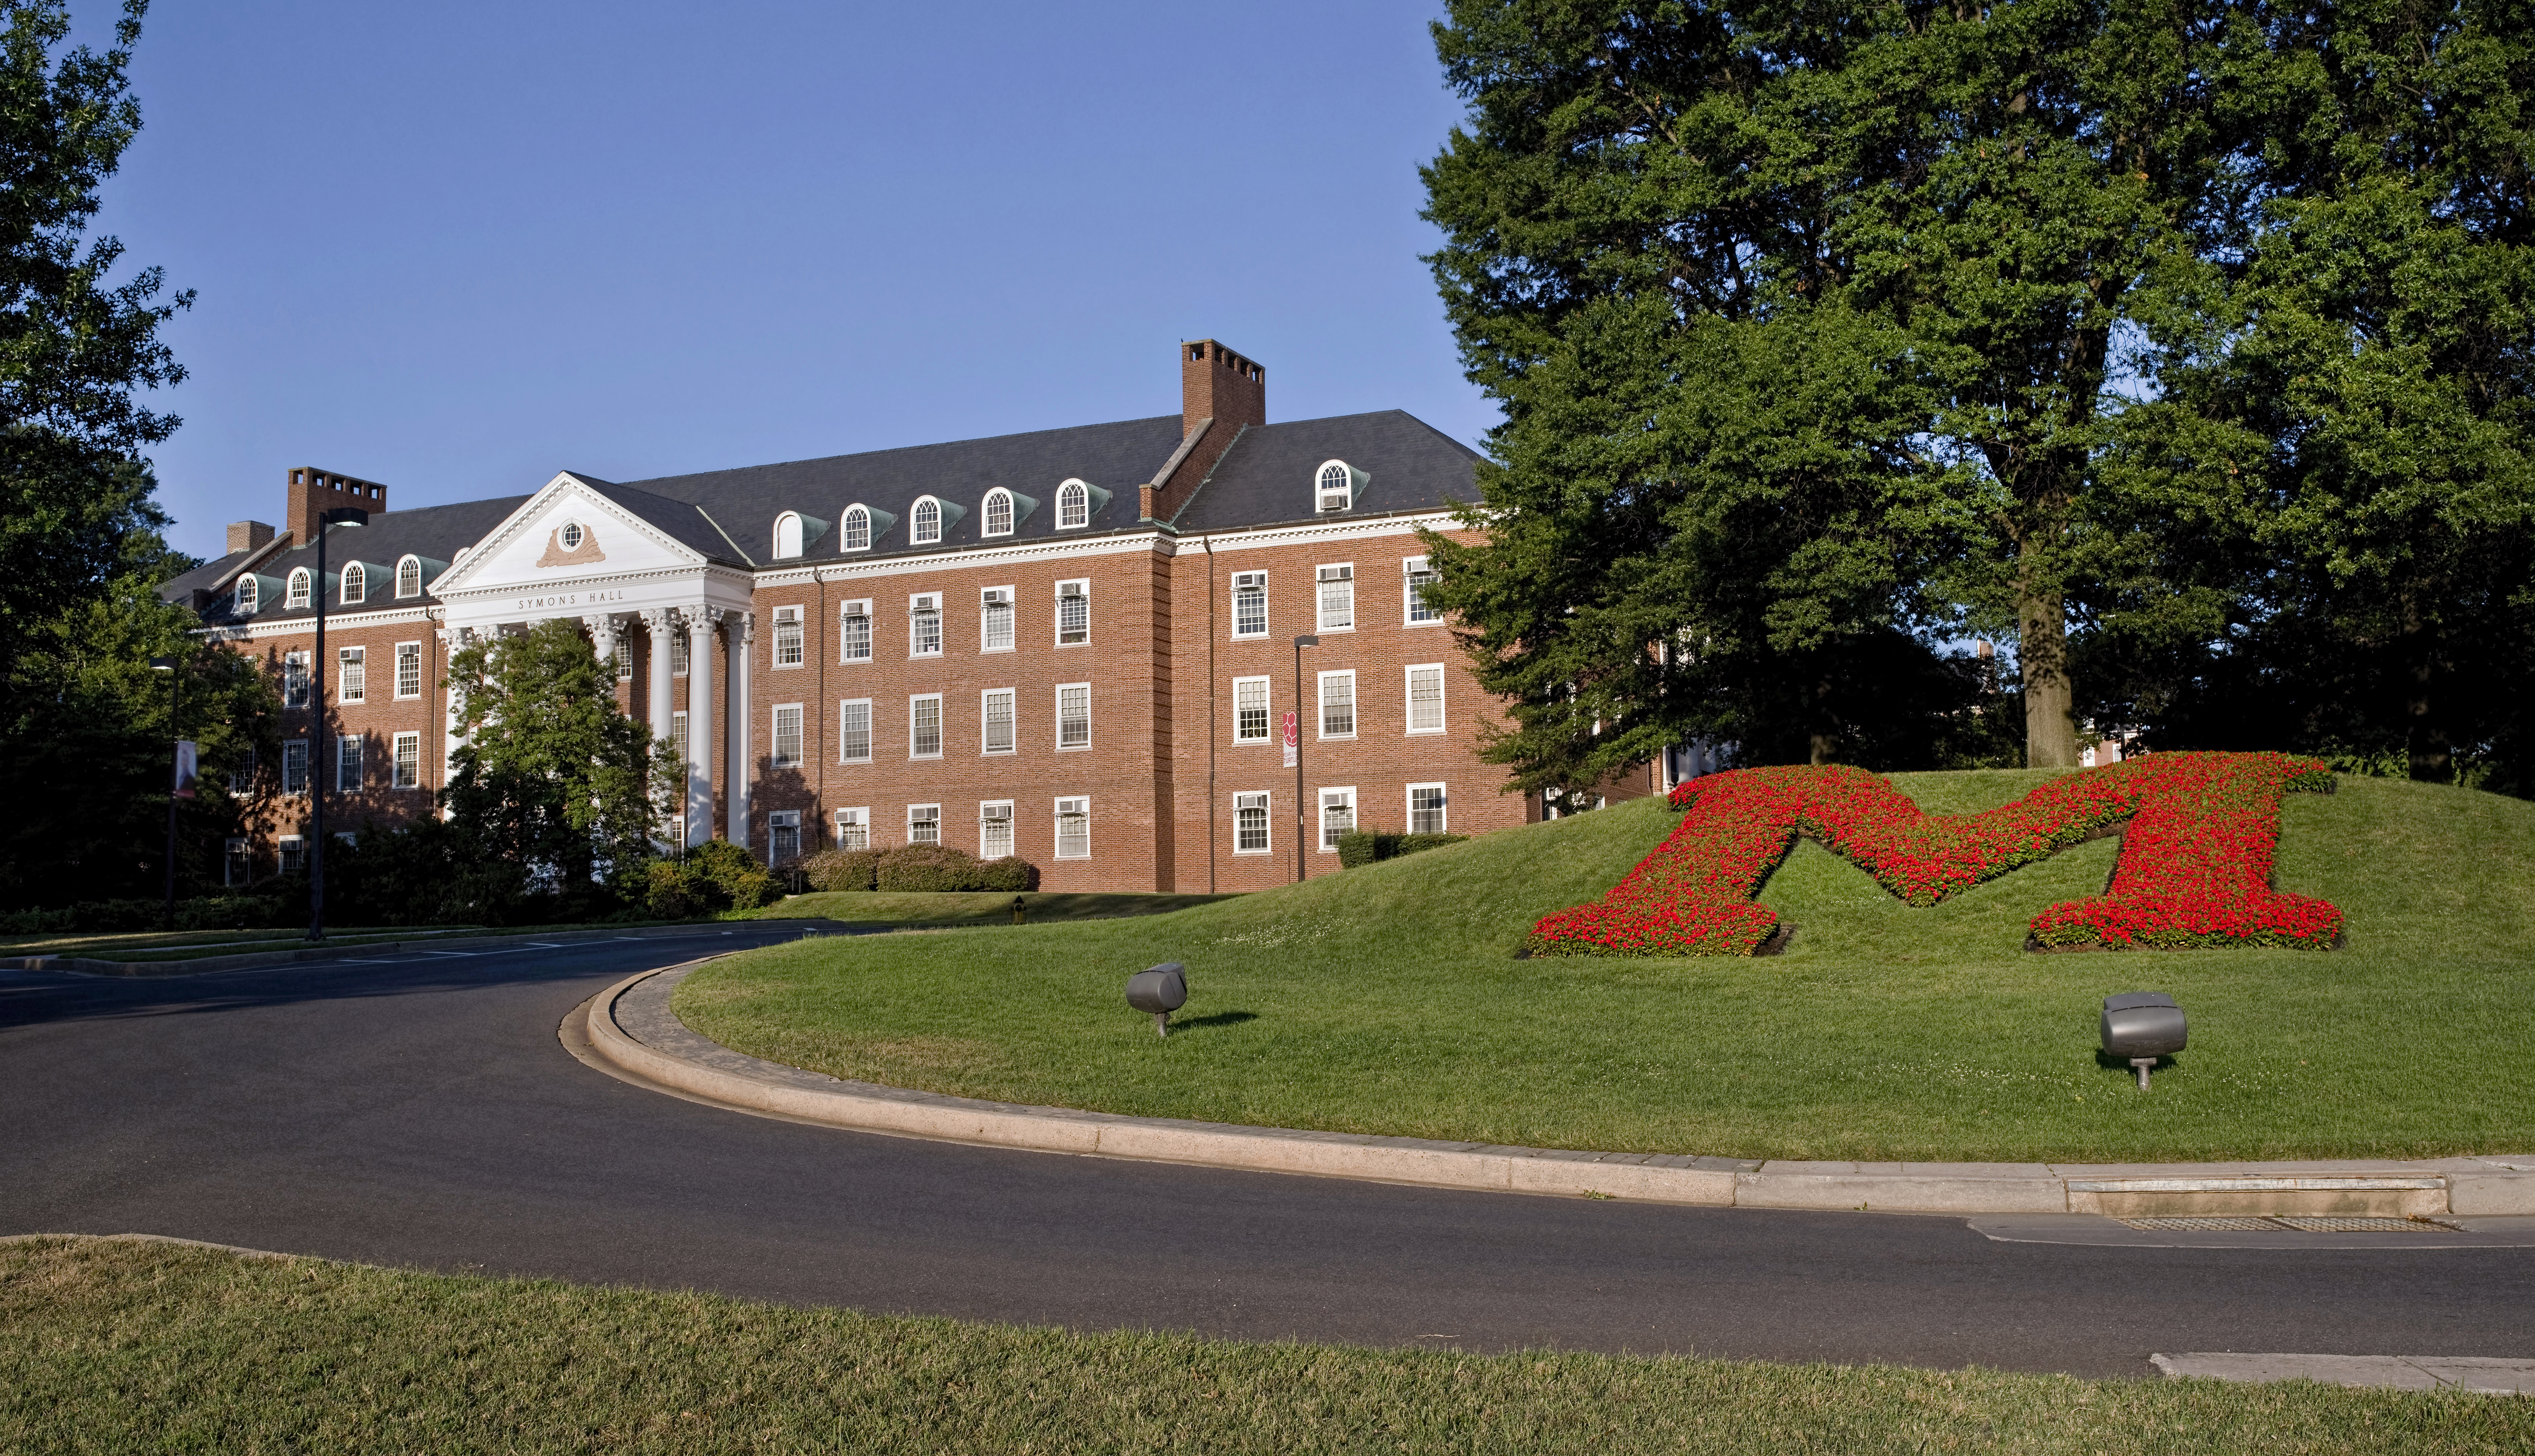 The University of Maryland reserves the right to interfere in fraternity and sorority activities if there are reports of hazing, even if it occurred off campus.